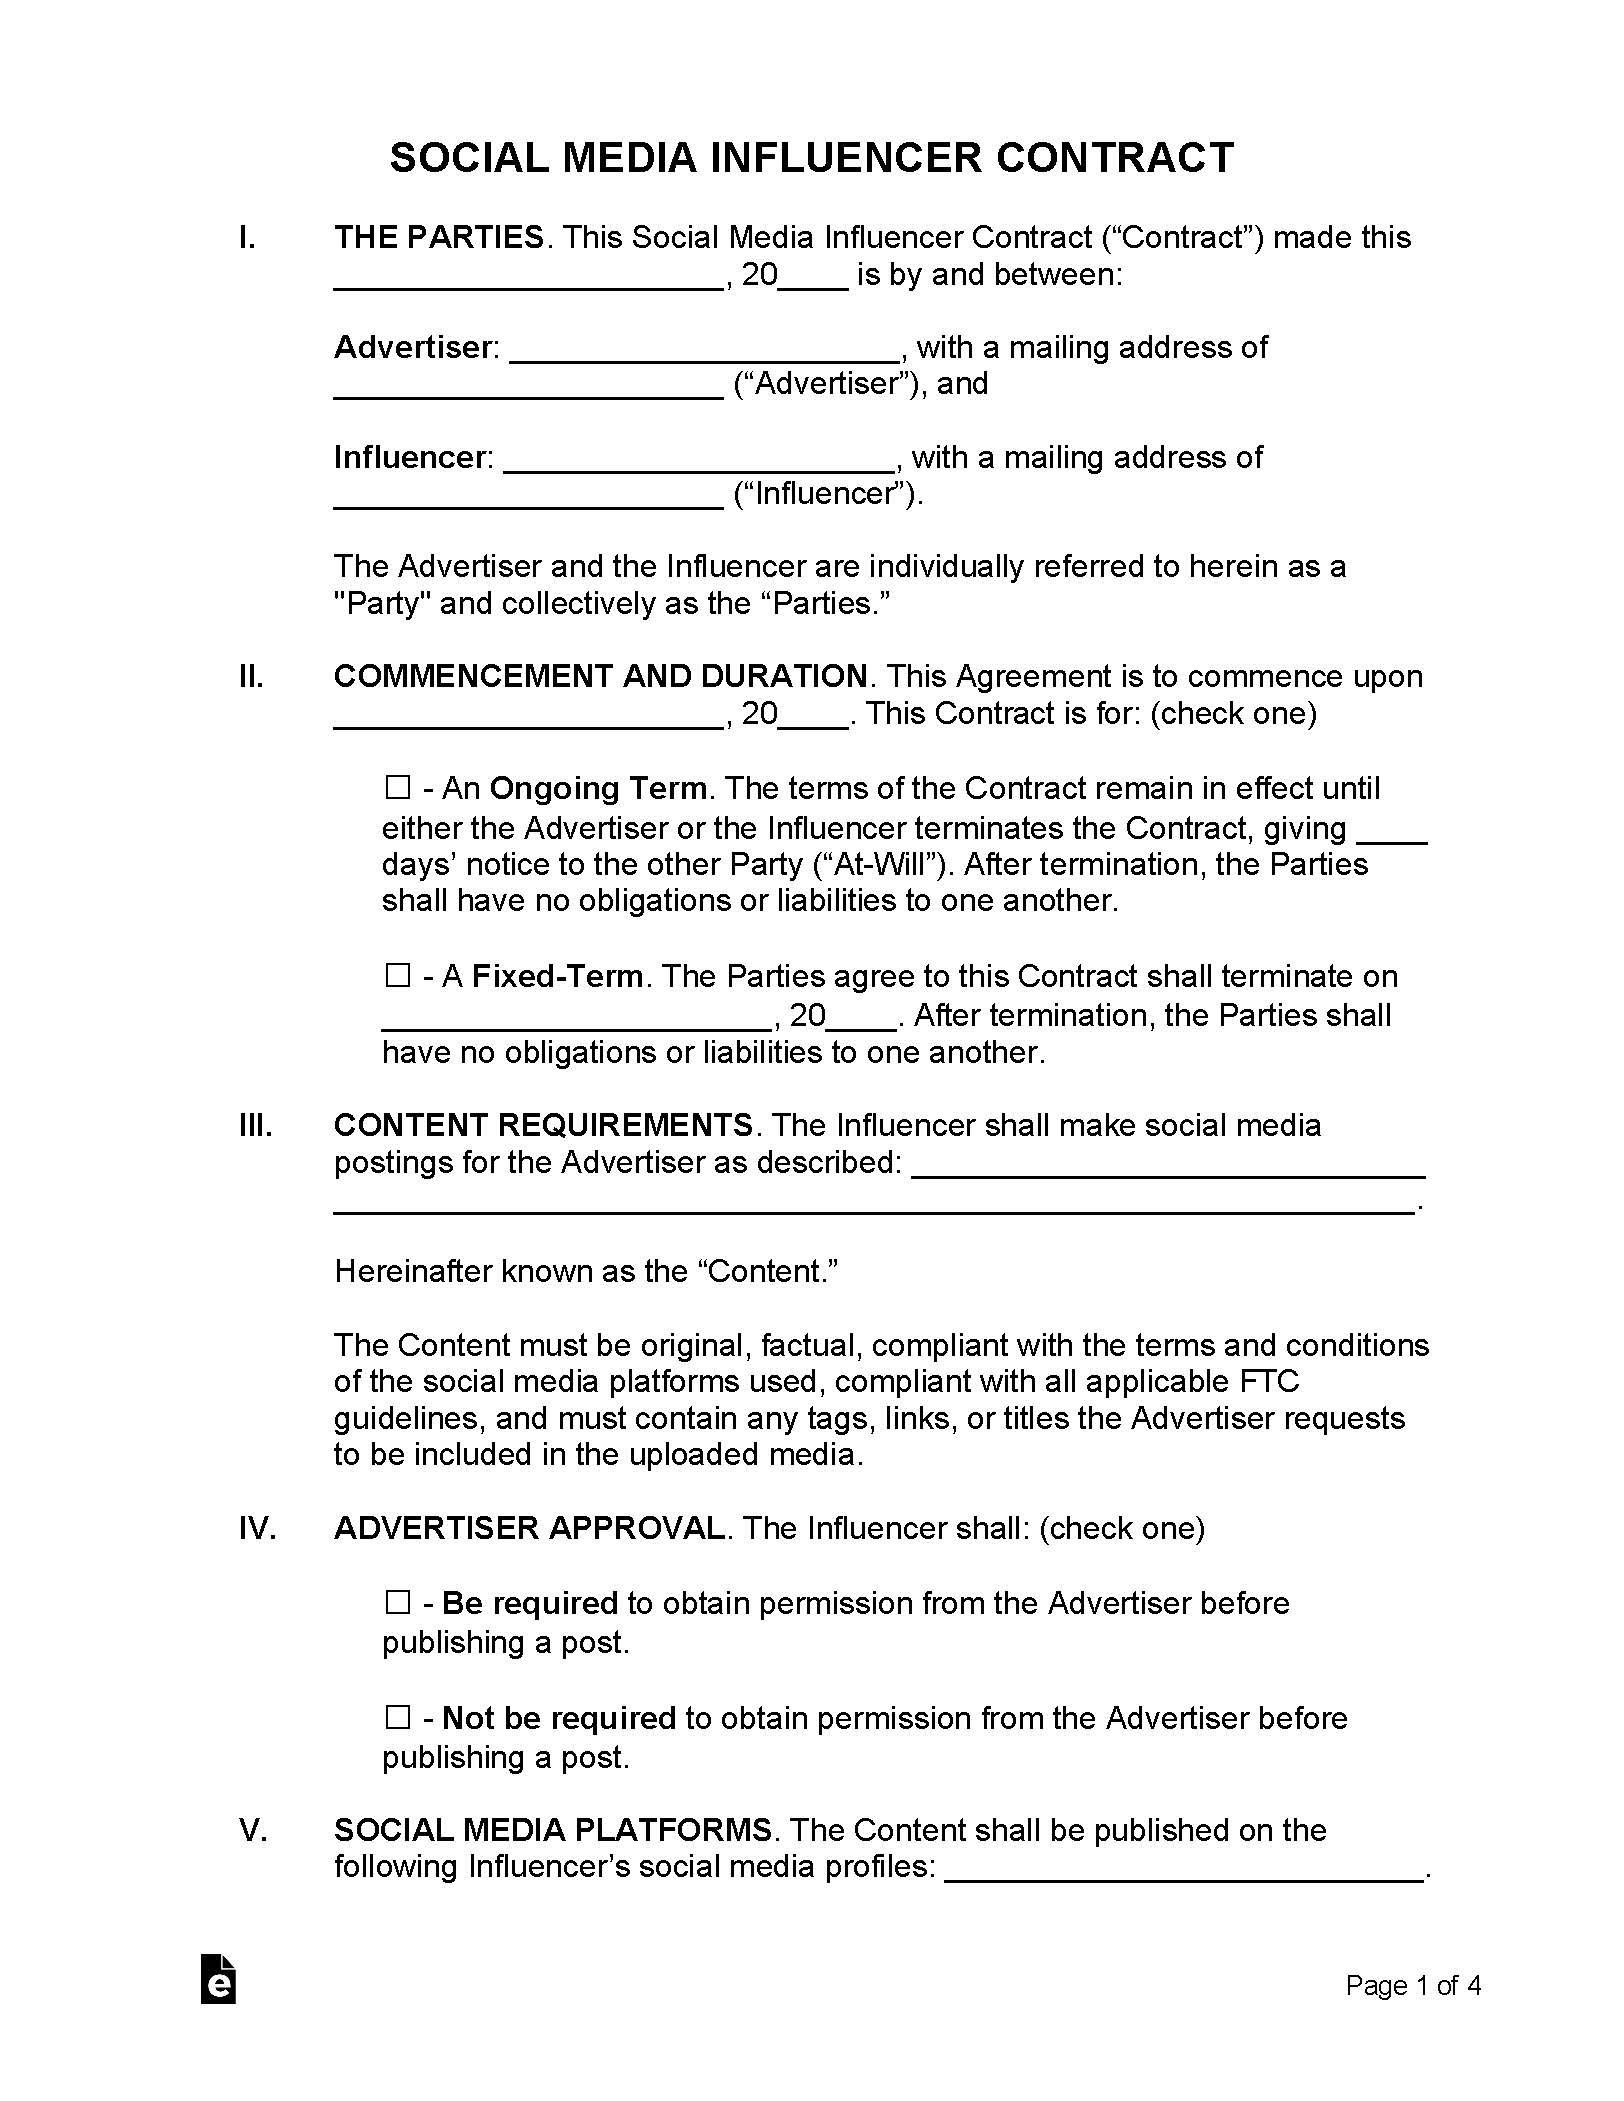 Social Media Influencer Contract Page 1